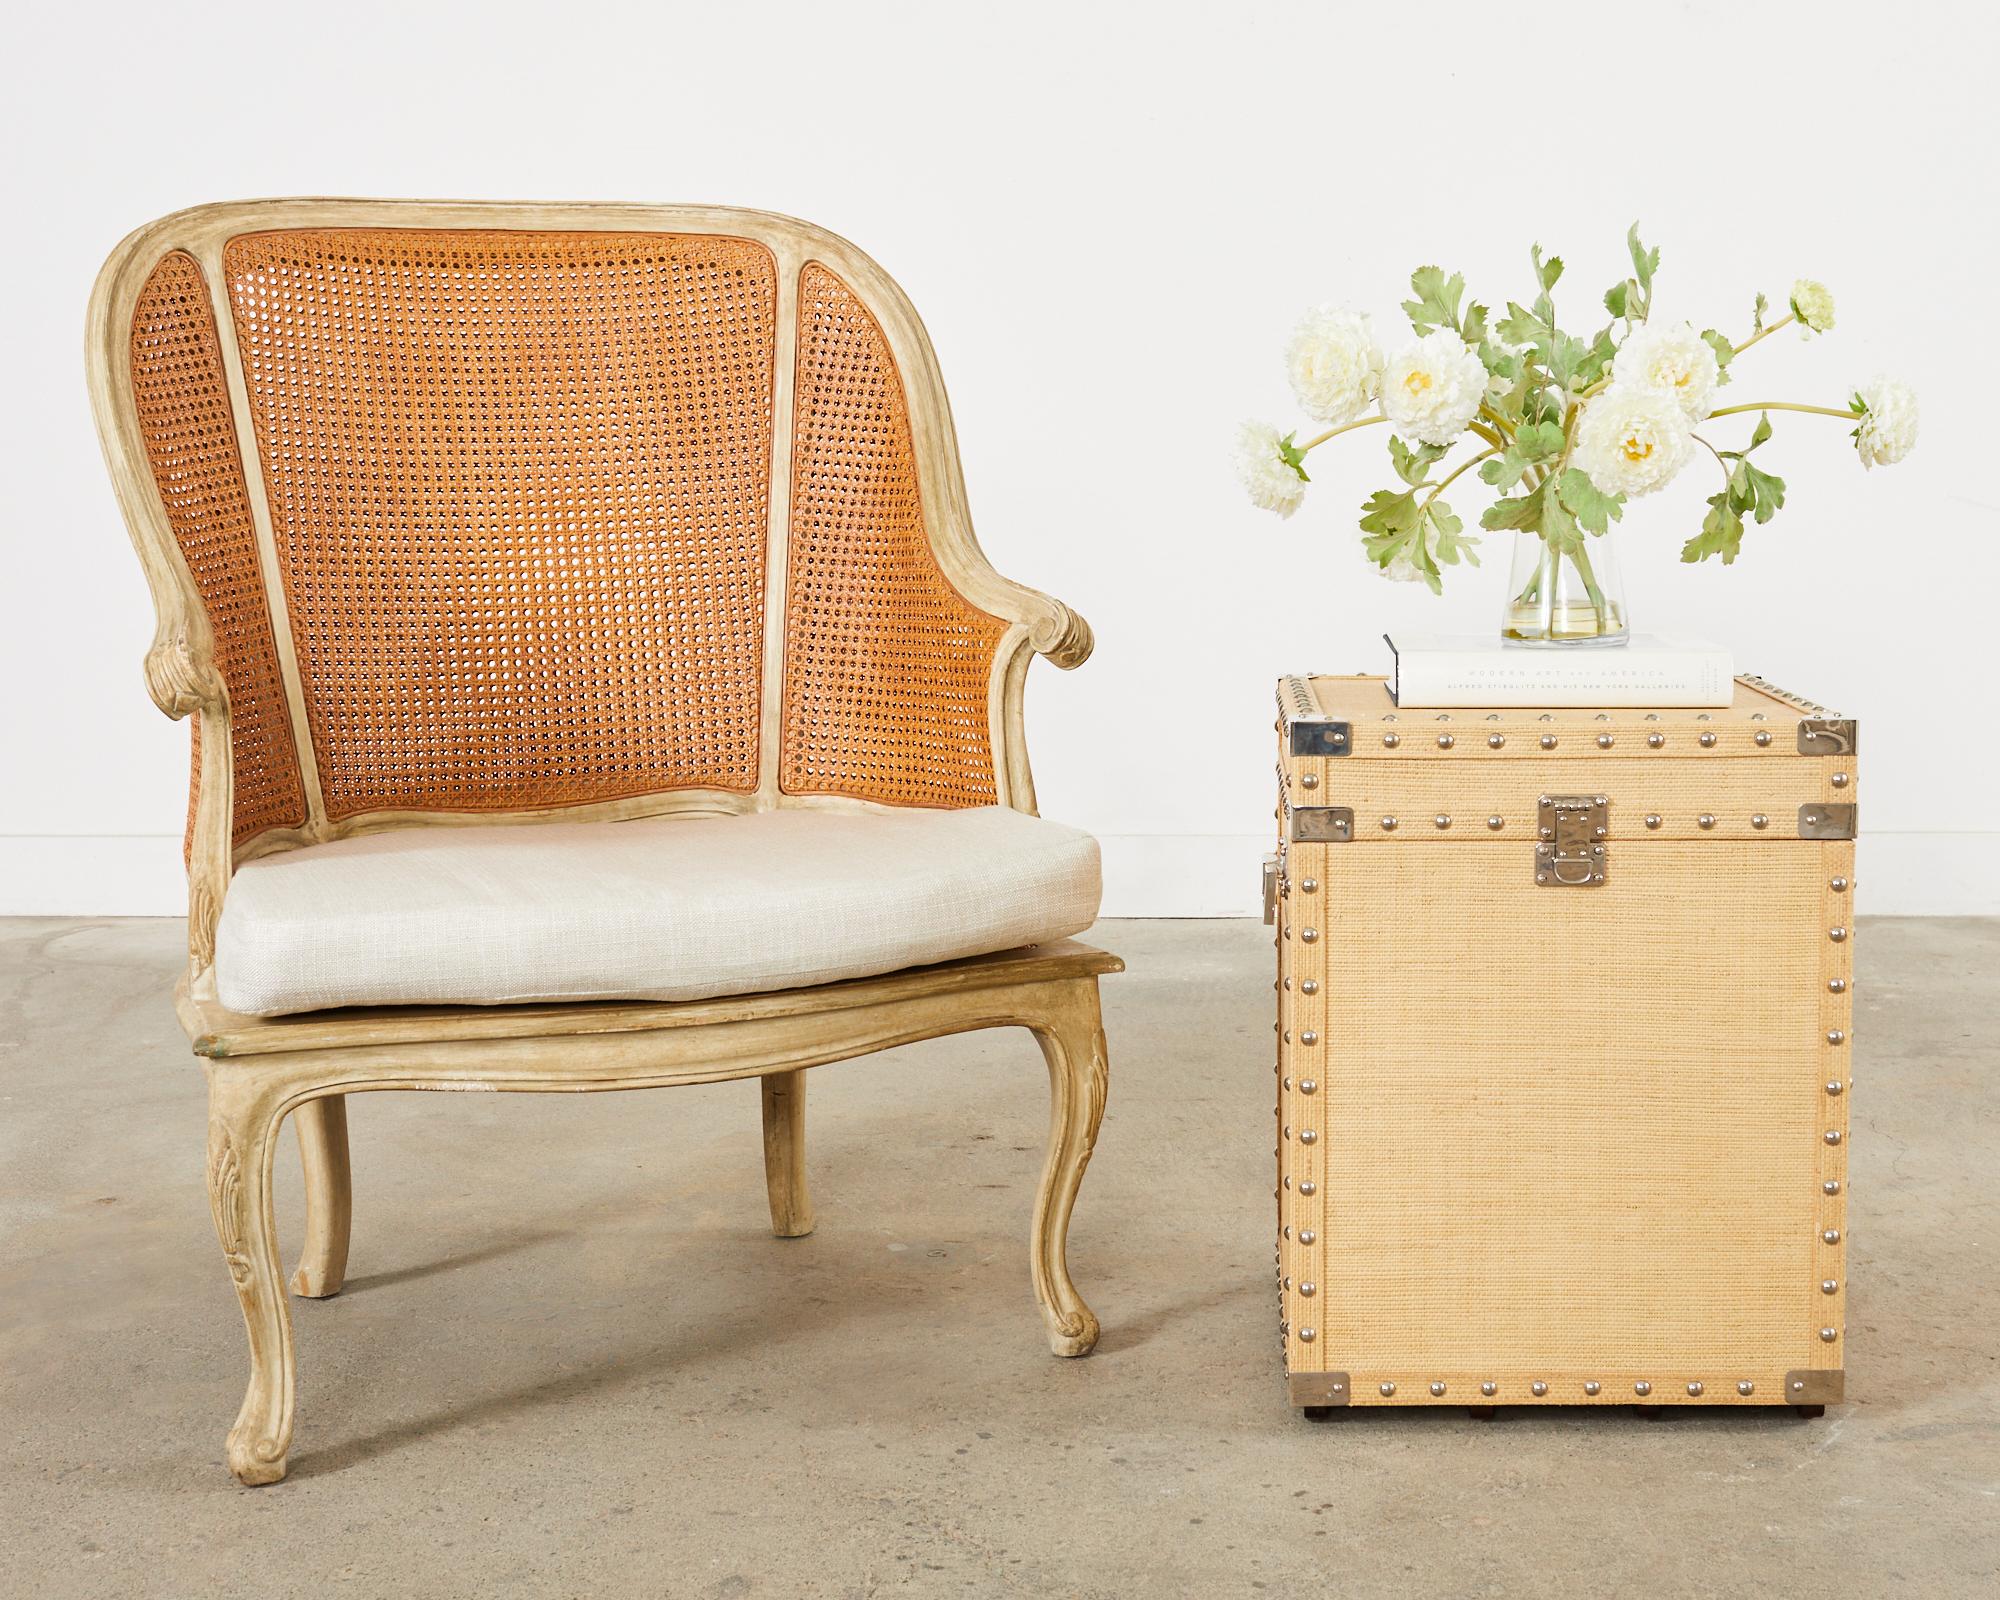 Gorgeous pair of mahogany hat trunk cube shaped storage boxes or side tables featuring a raffia grasscloth clad exterior. The lidded trunks have decorative metal studded borders and brass nickel finished corners, handles, and faux lock plates. The